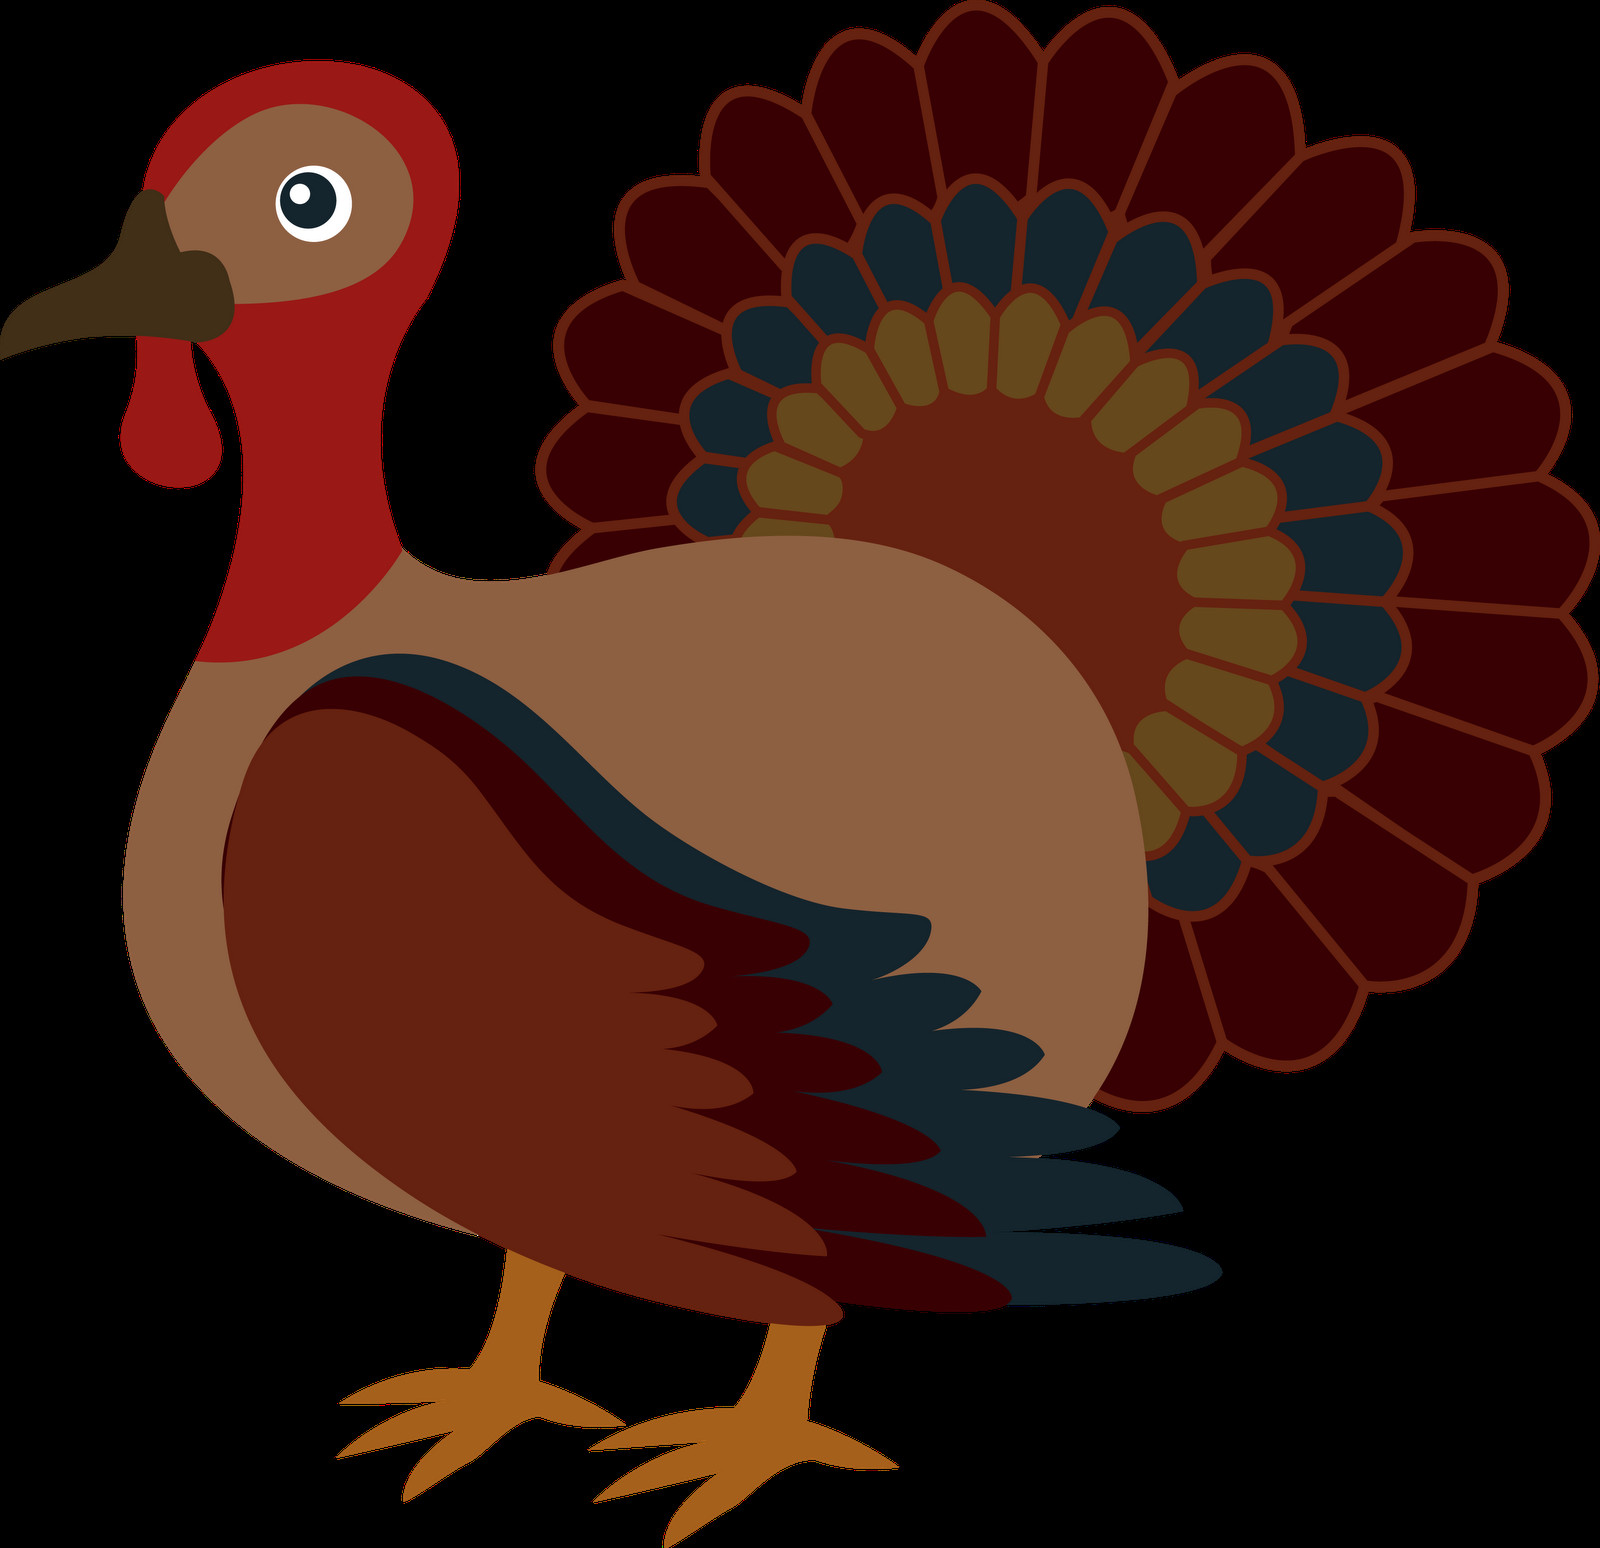 Thanksgiving Turkey Clip Art
 collection of Thanksgiving Clipart offers many pictures of